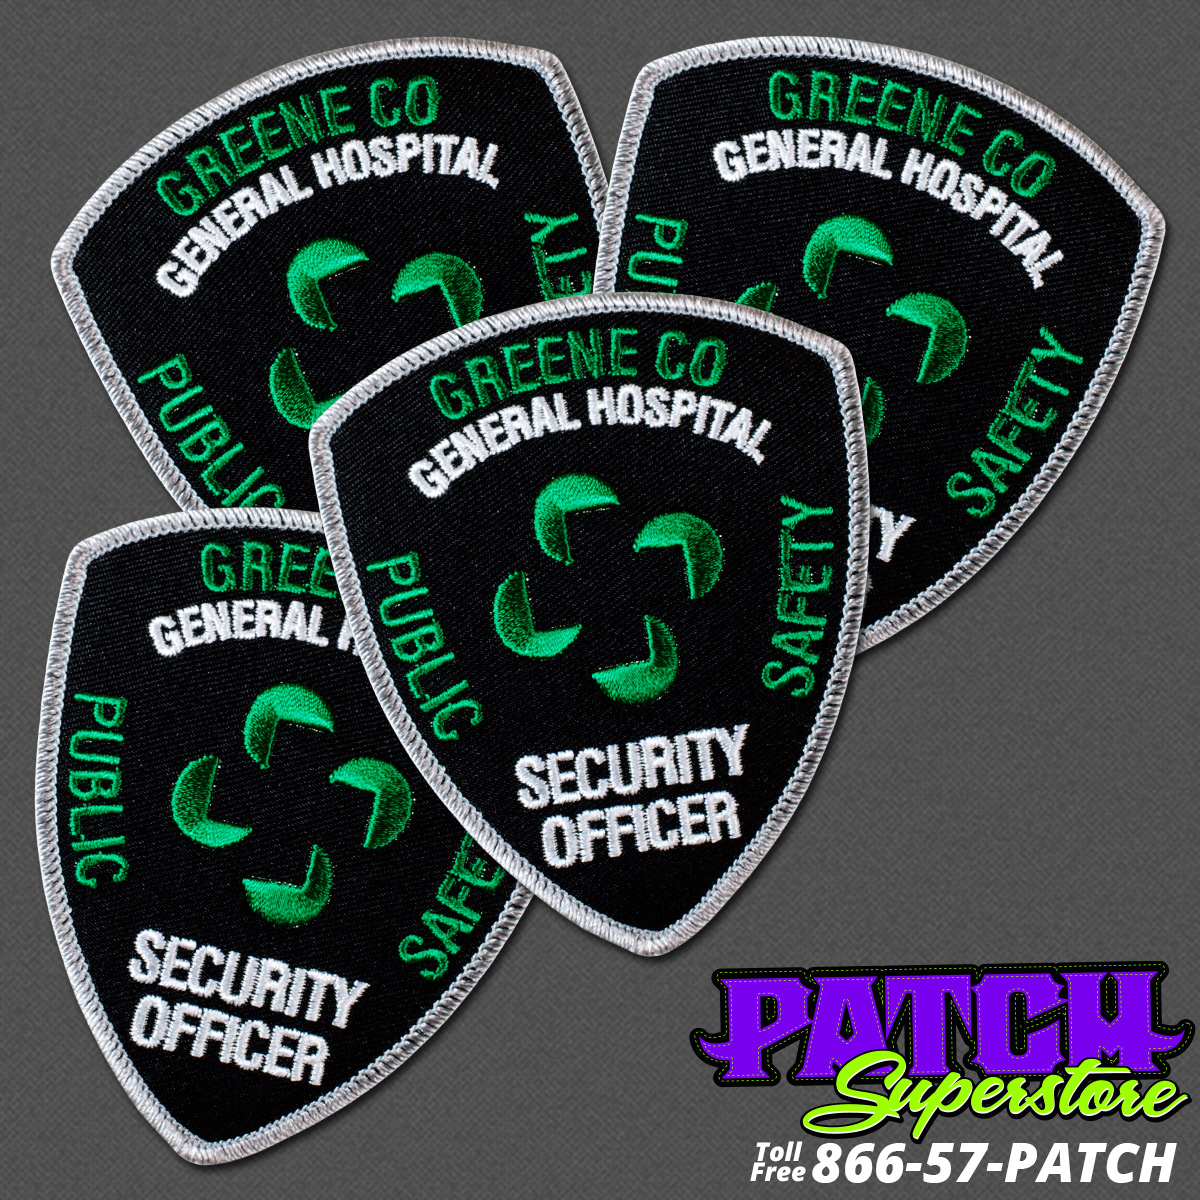 Greene Co General Hospital Security Patch - PatchSuperstore